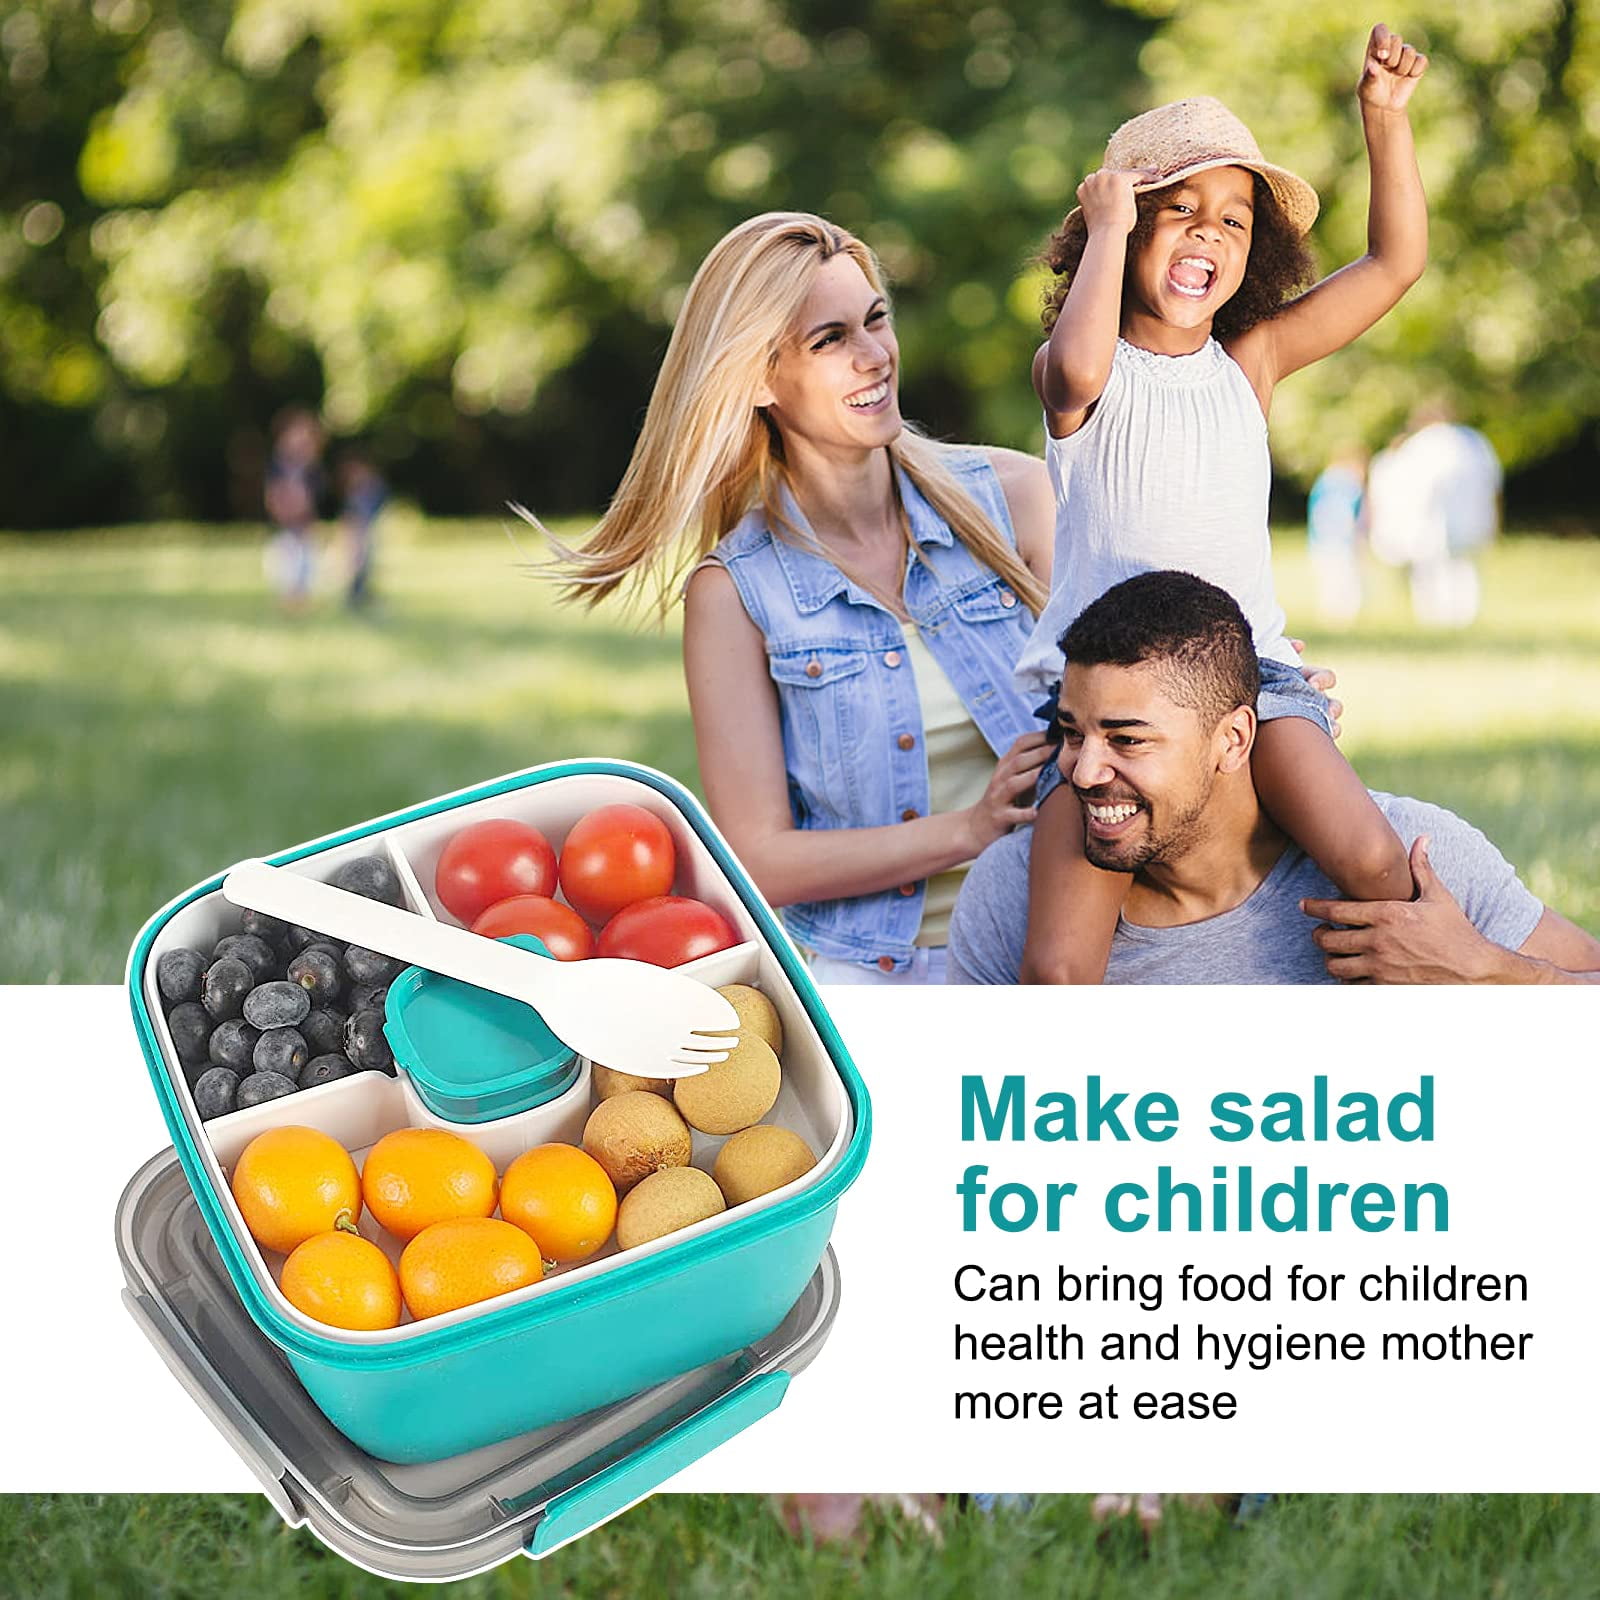 Visen 2 Pack Salad Lunch Container to go,large BPA-Free Salad container,52 oz Salad Bowl,3 Compartment Tray with Dressing Container